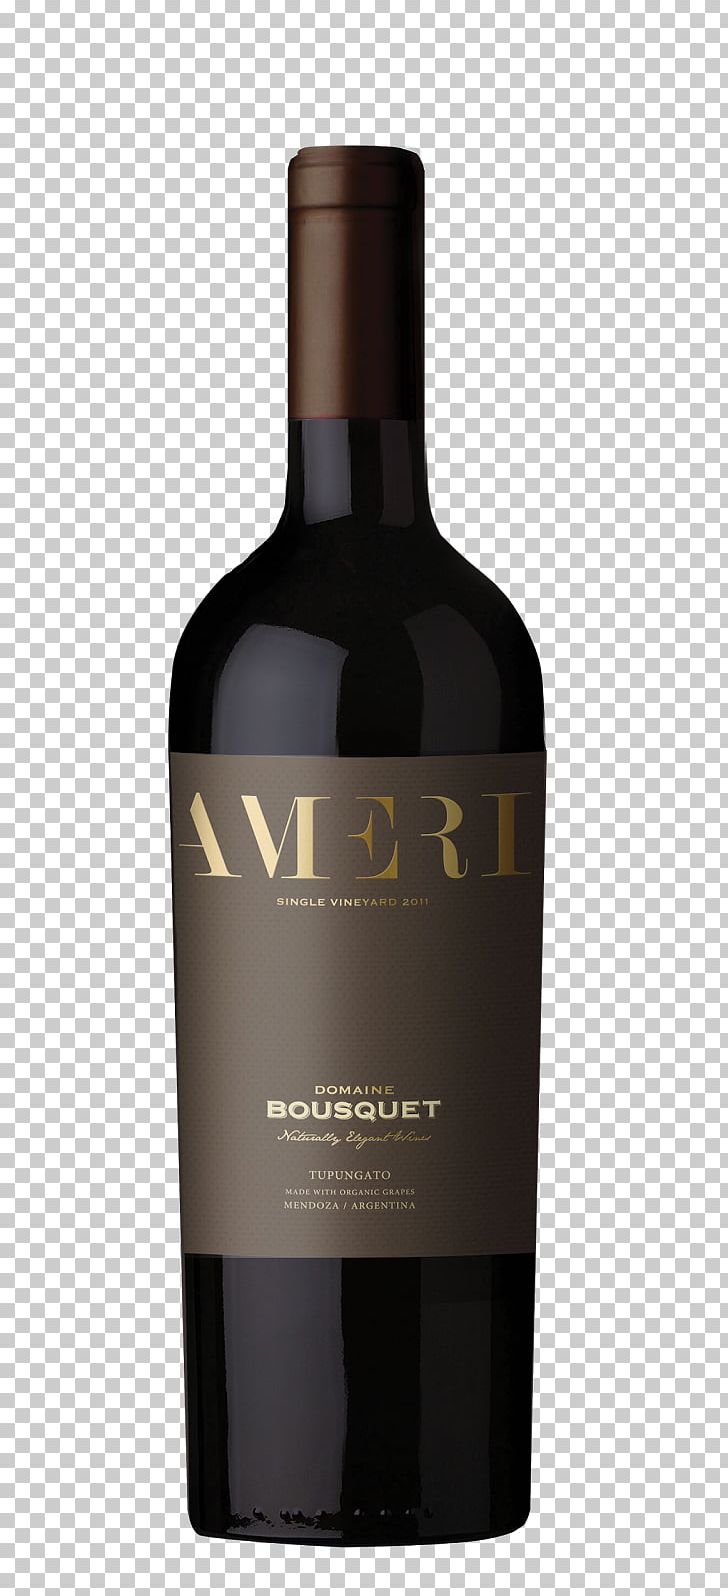 Wine Domaine Bousquet Cabernet Sauvignon Blended Whiskey Malbec PNG, Clipart, Alcoholic Beverage, Blend, Blended Whiskey, Bottle, Cabernet Franc Free PNG Download